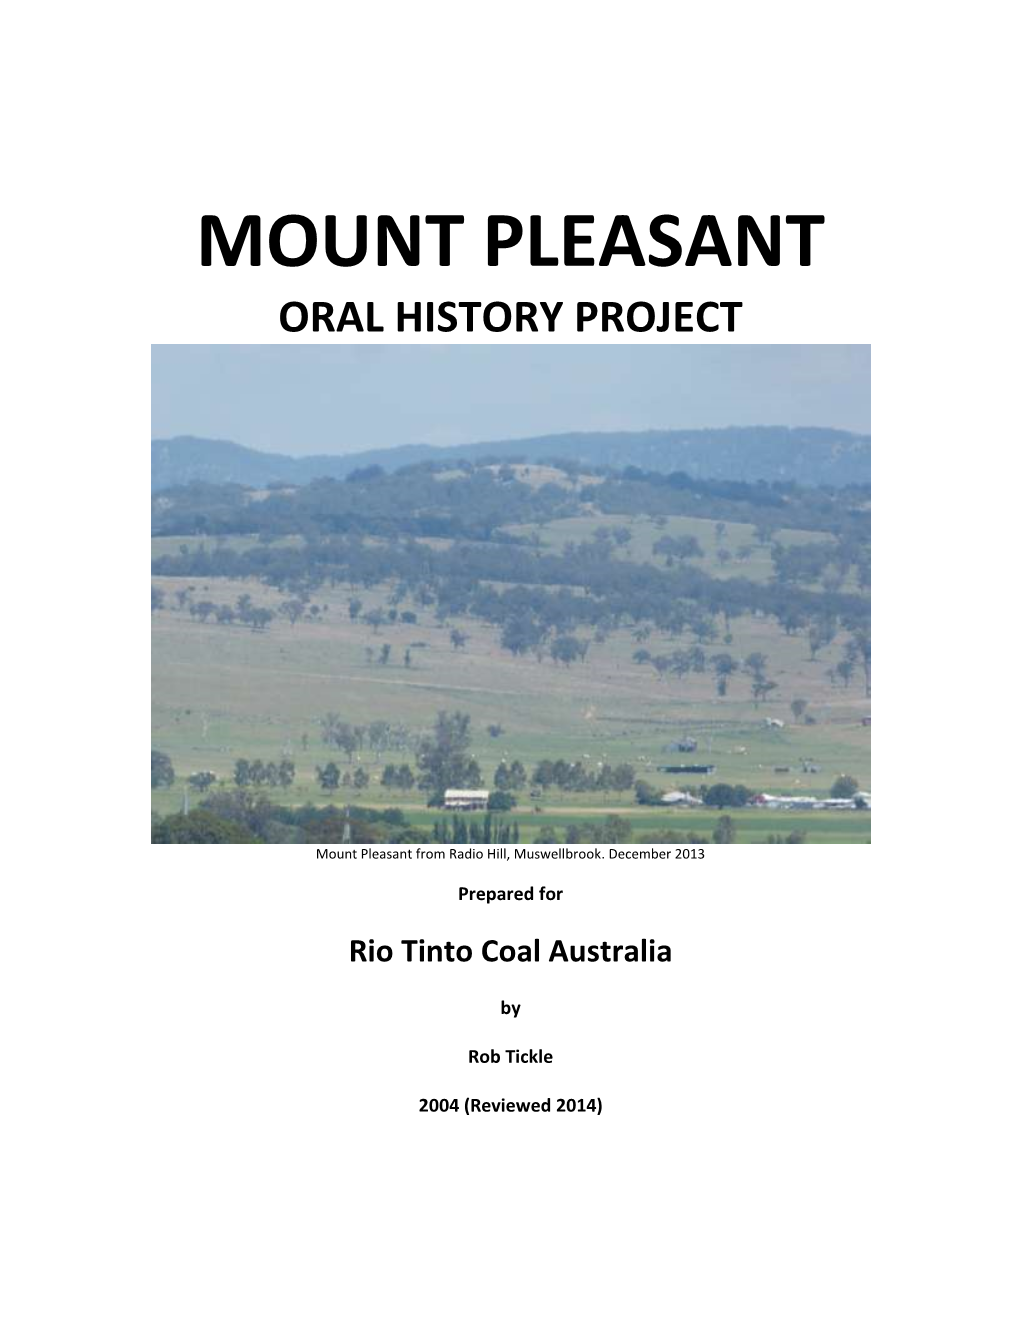 Mount Pleasant Oral History Project